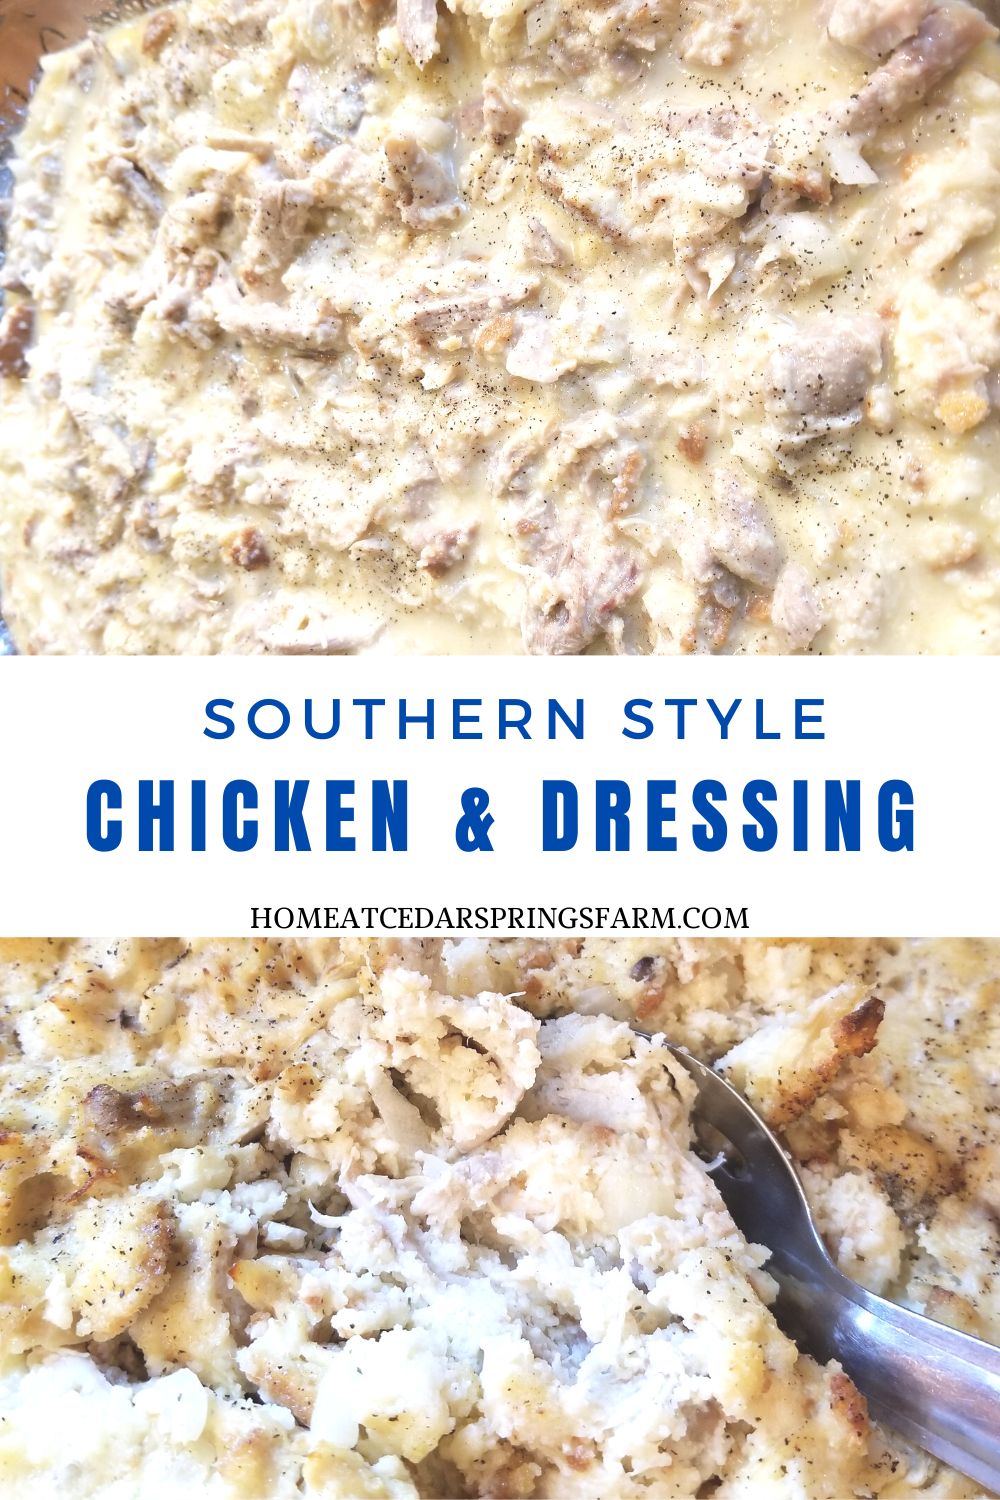 Southern Style Chicken and Dressing with serving spoon and text overlay.